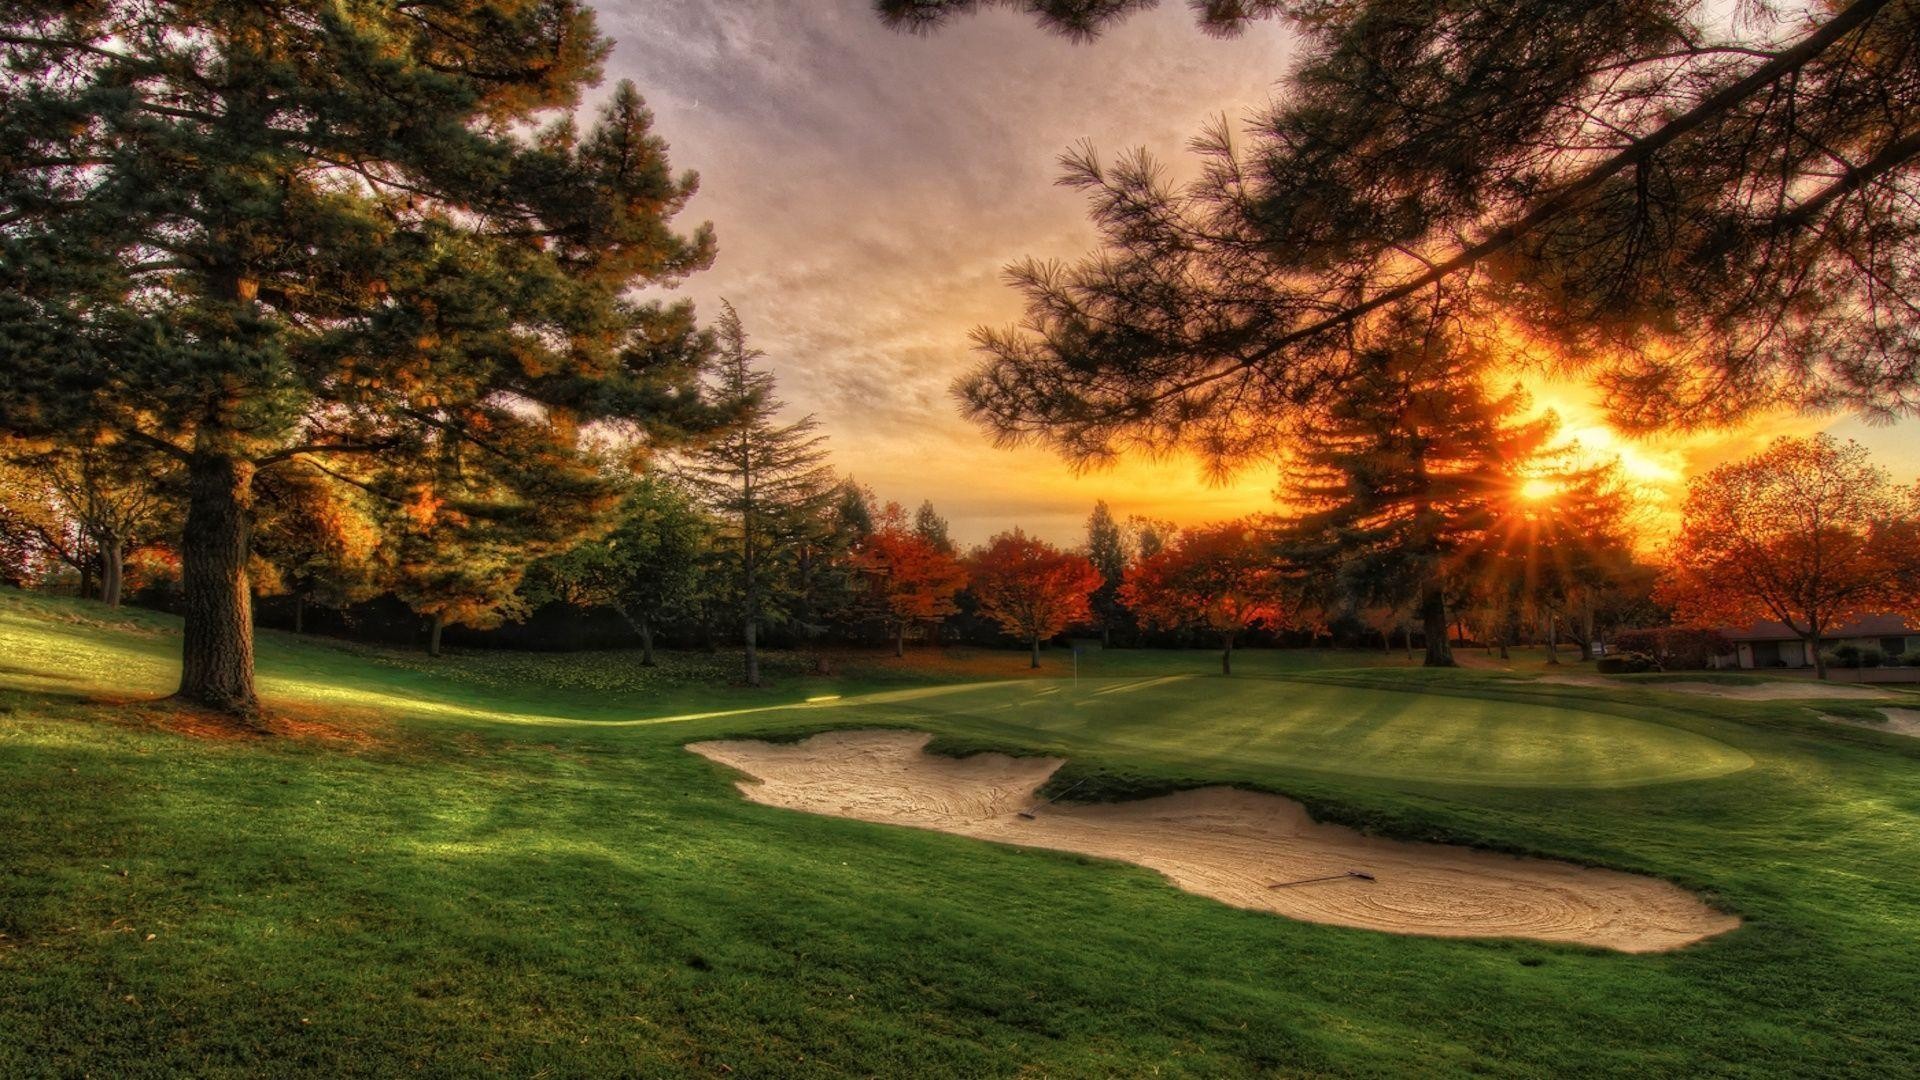 1920x1080 Golf Course HD Wallpaper | Golf Course Pictures | Cool Wallpapers